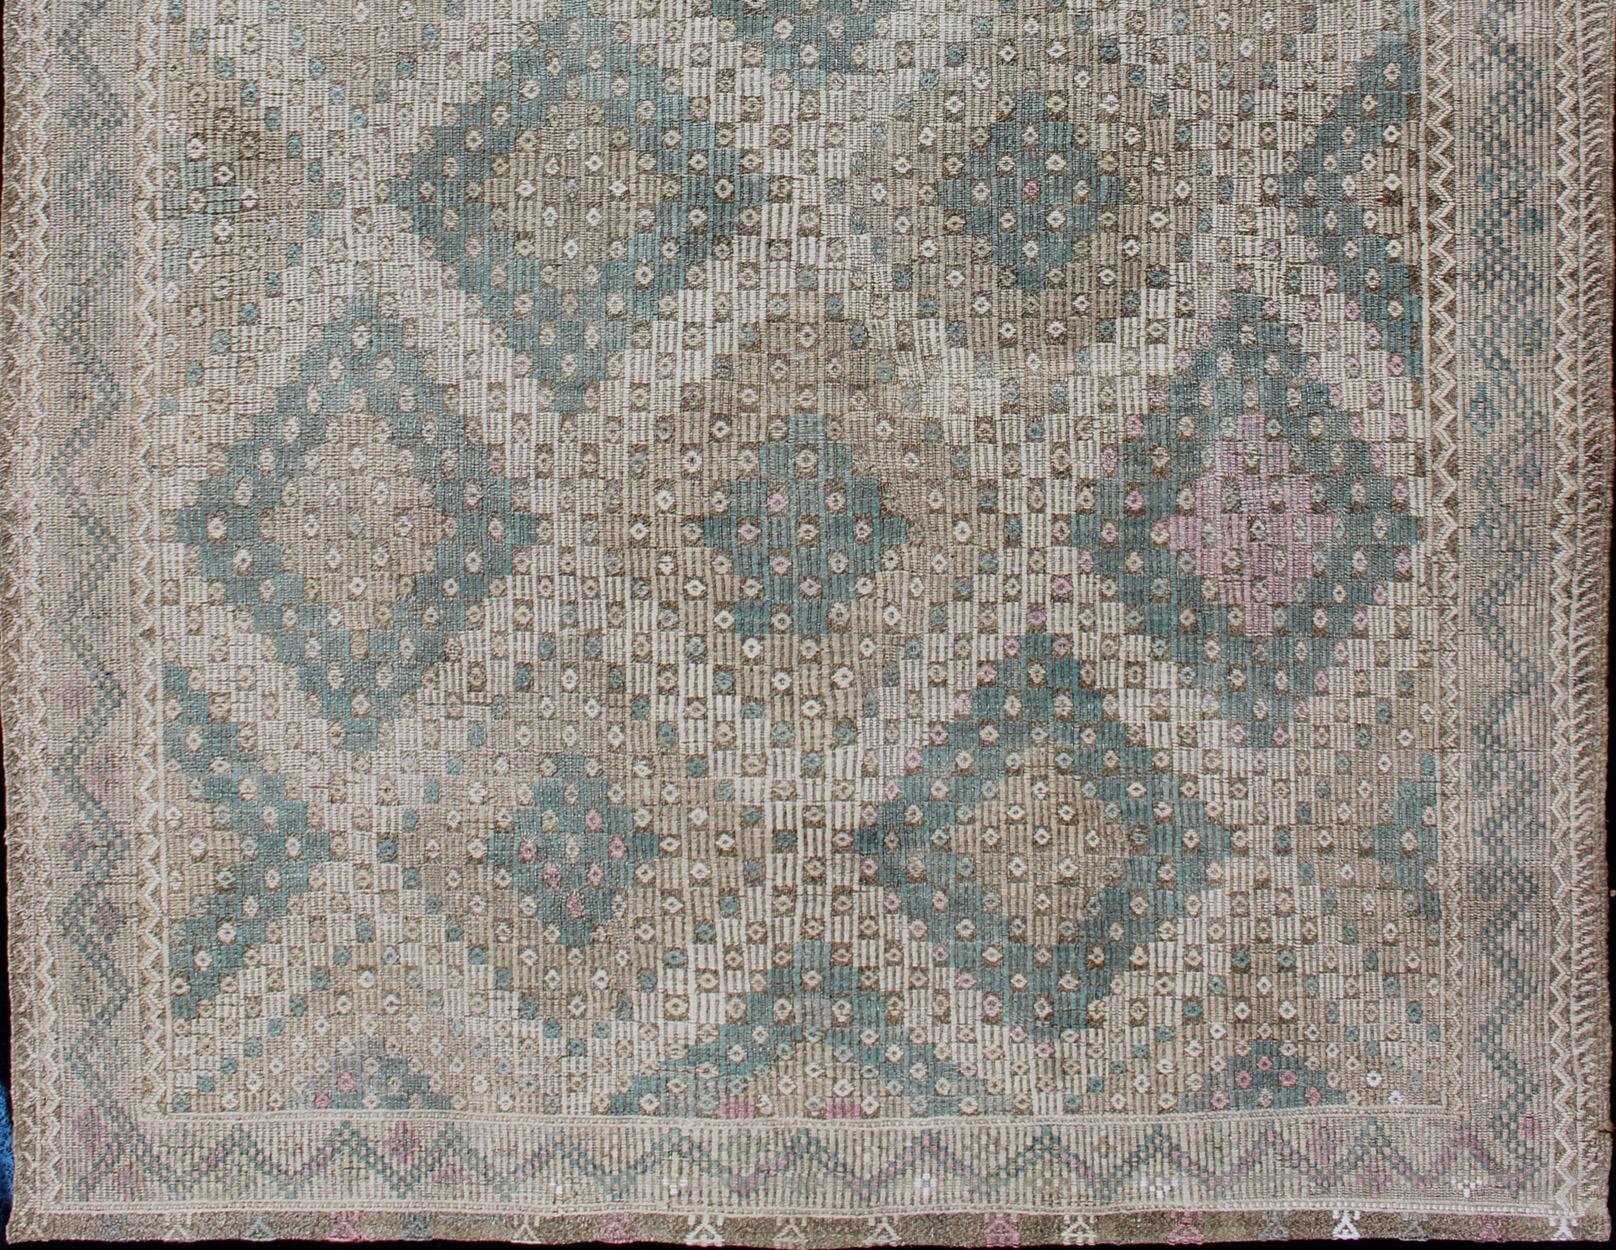 Hand-Woven Diamond Design Vintage Turkish Embroidered Kilim in Light Teal blue, Tan, Brown For Sale